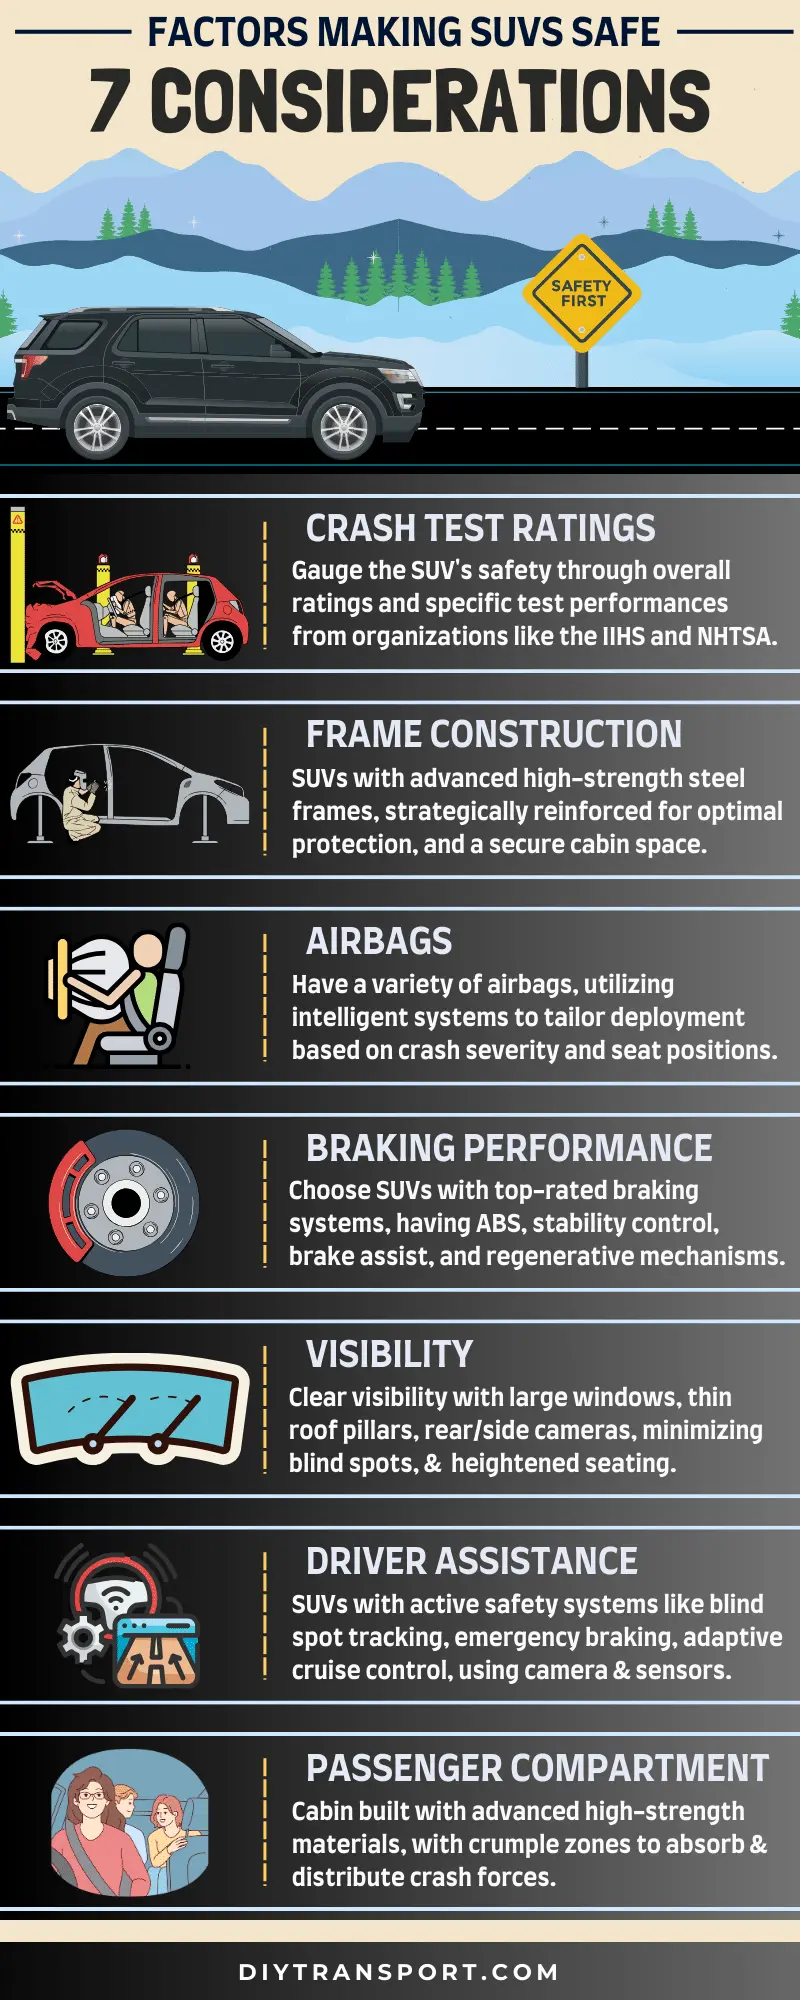 What Makes An SUV Truly Safe? - 7 Factors to Consider